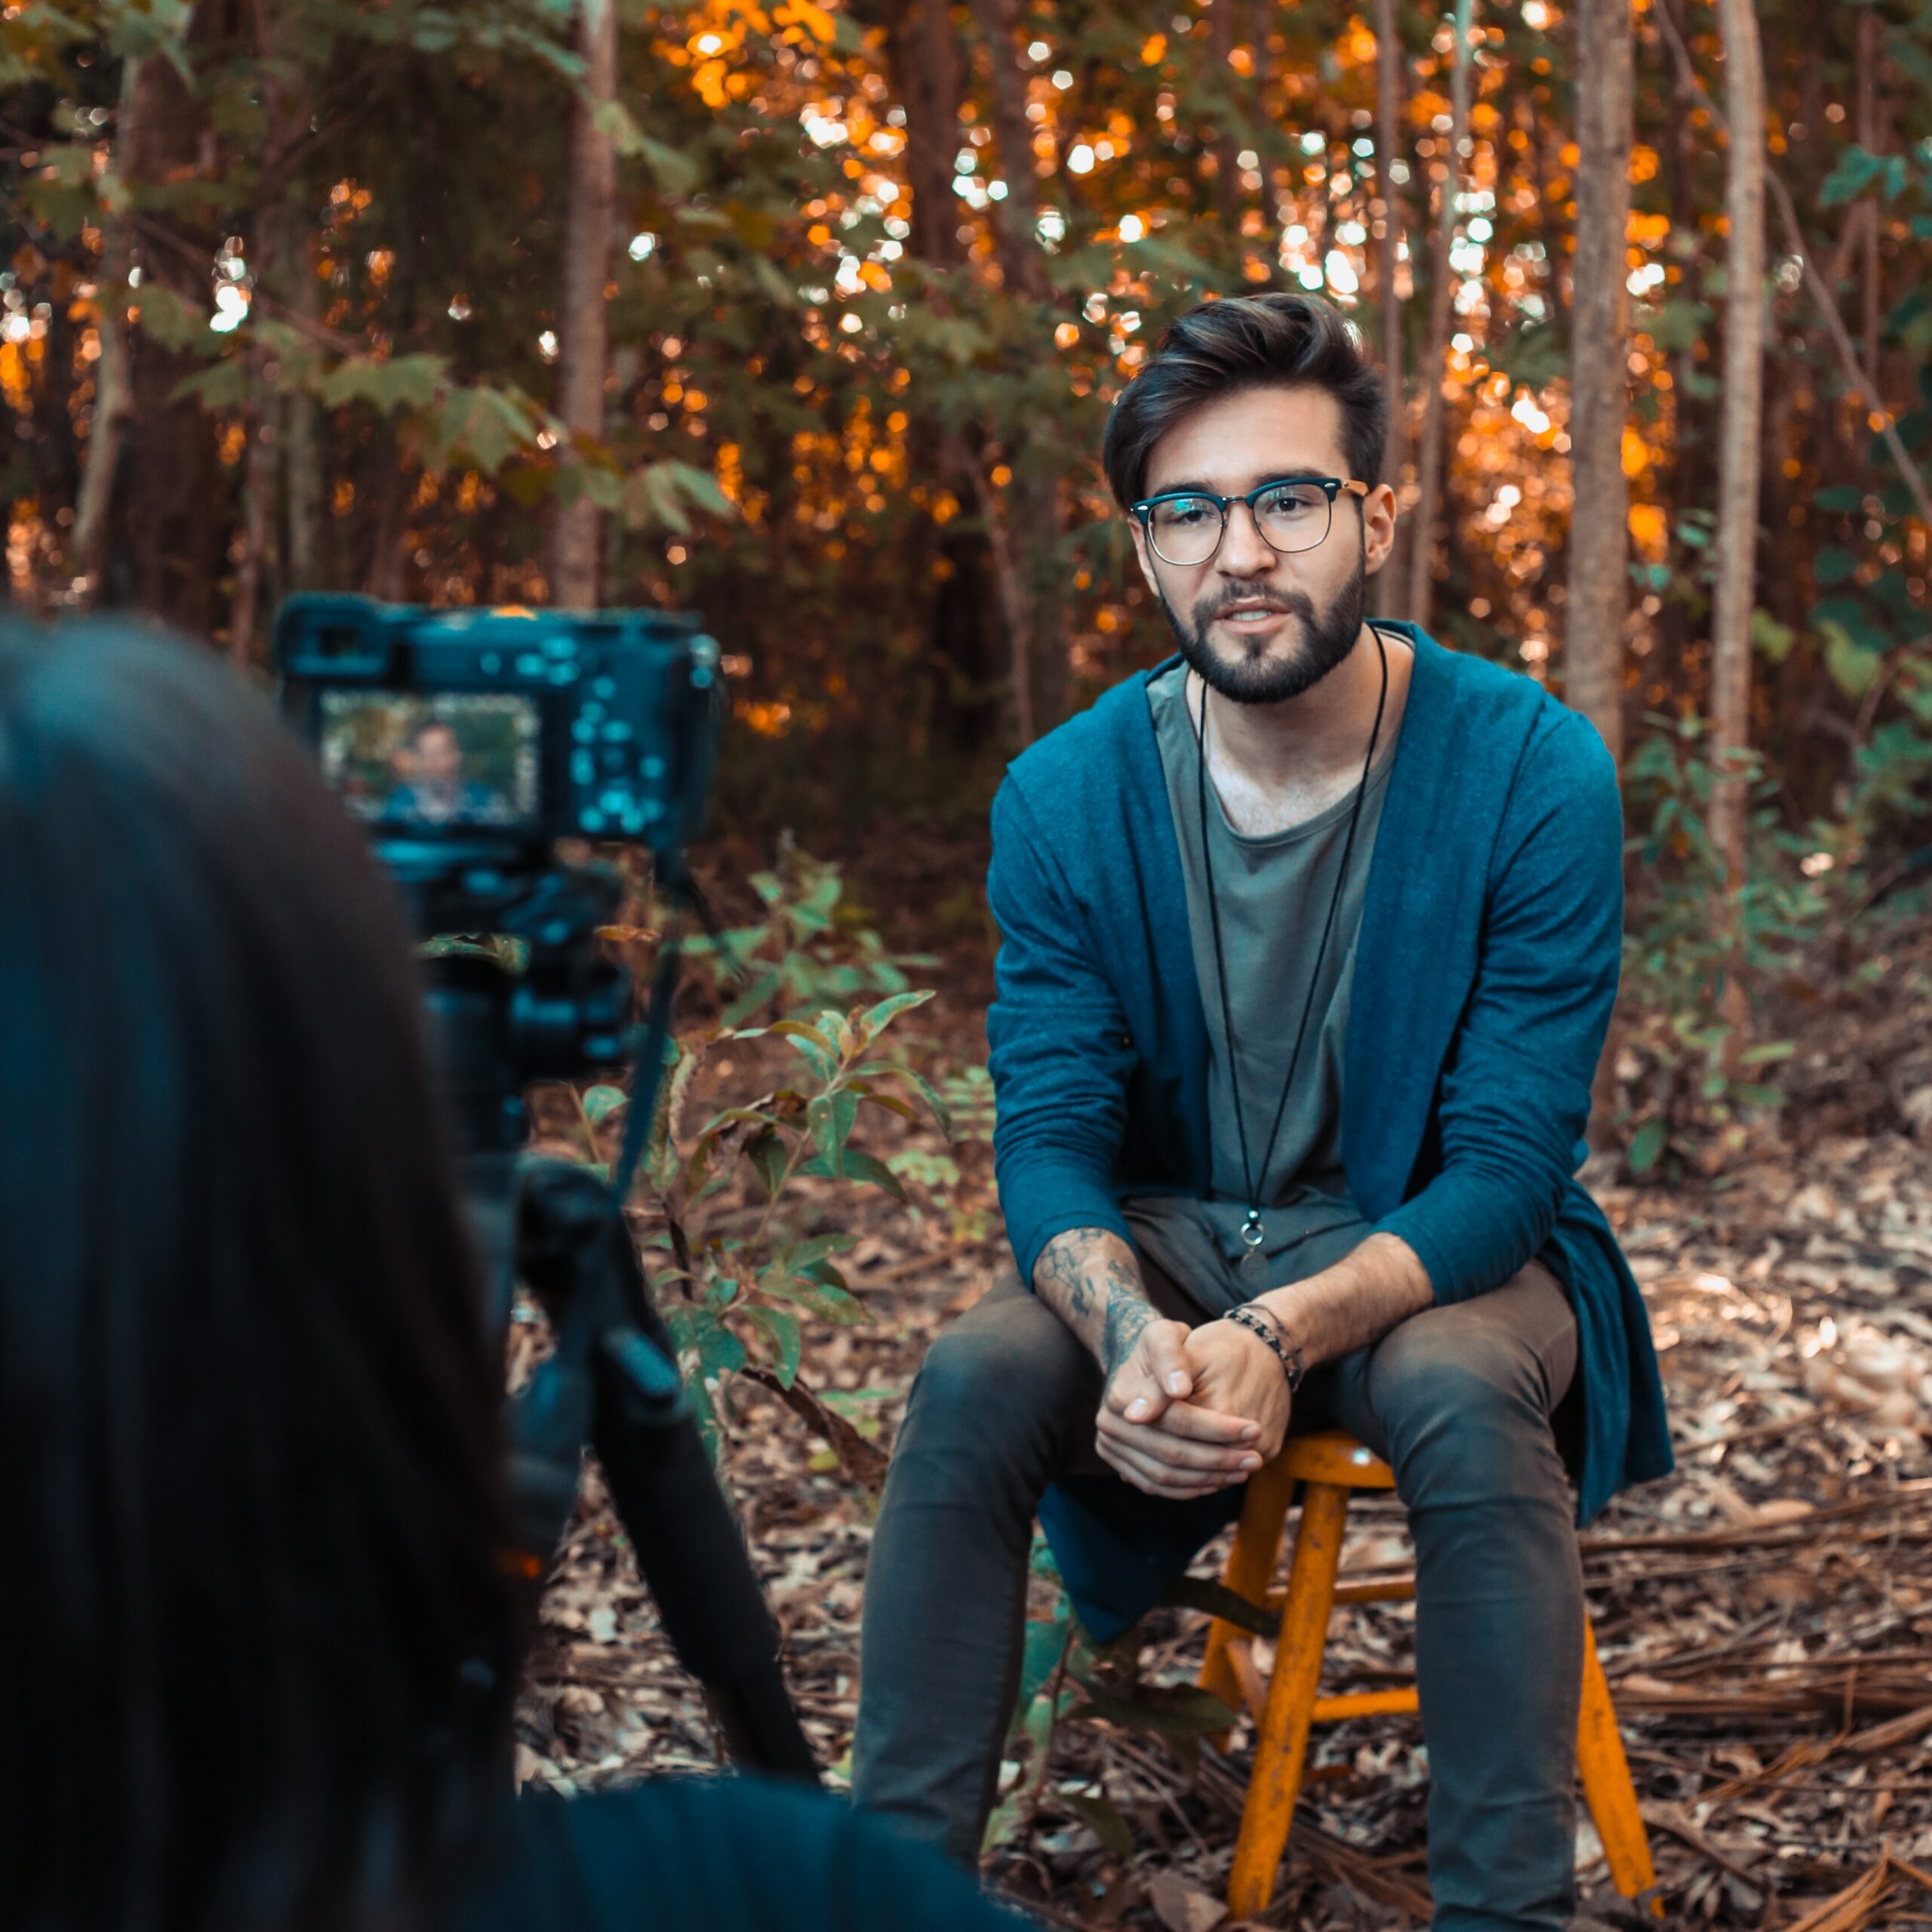 How To Repurpose Video Content: 5 Simple Ways To Get The Most Out Of Your Videos.